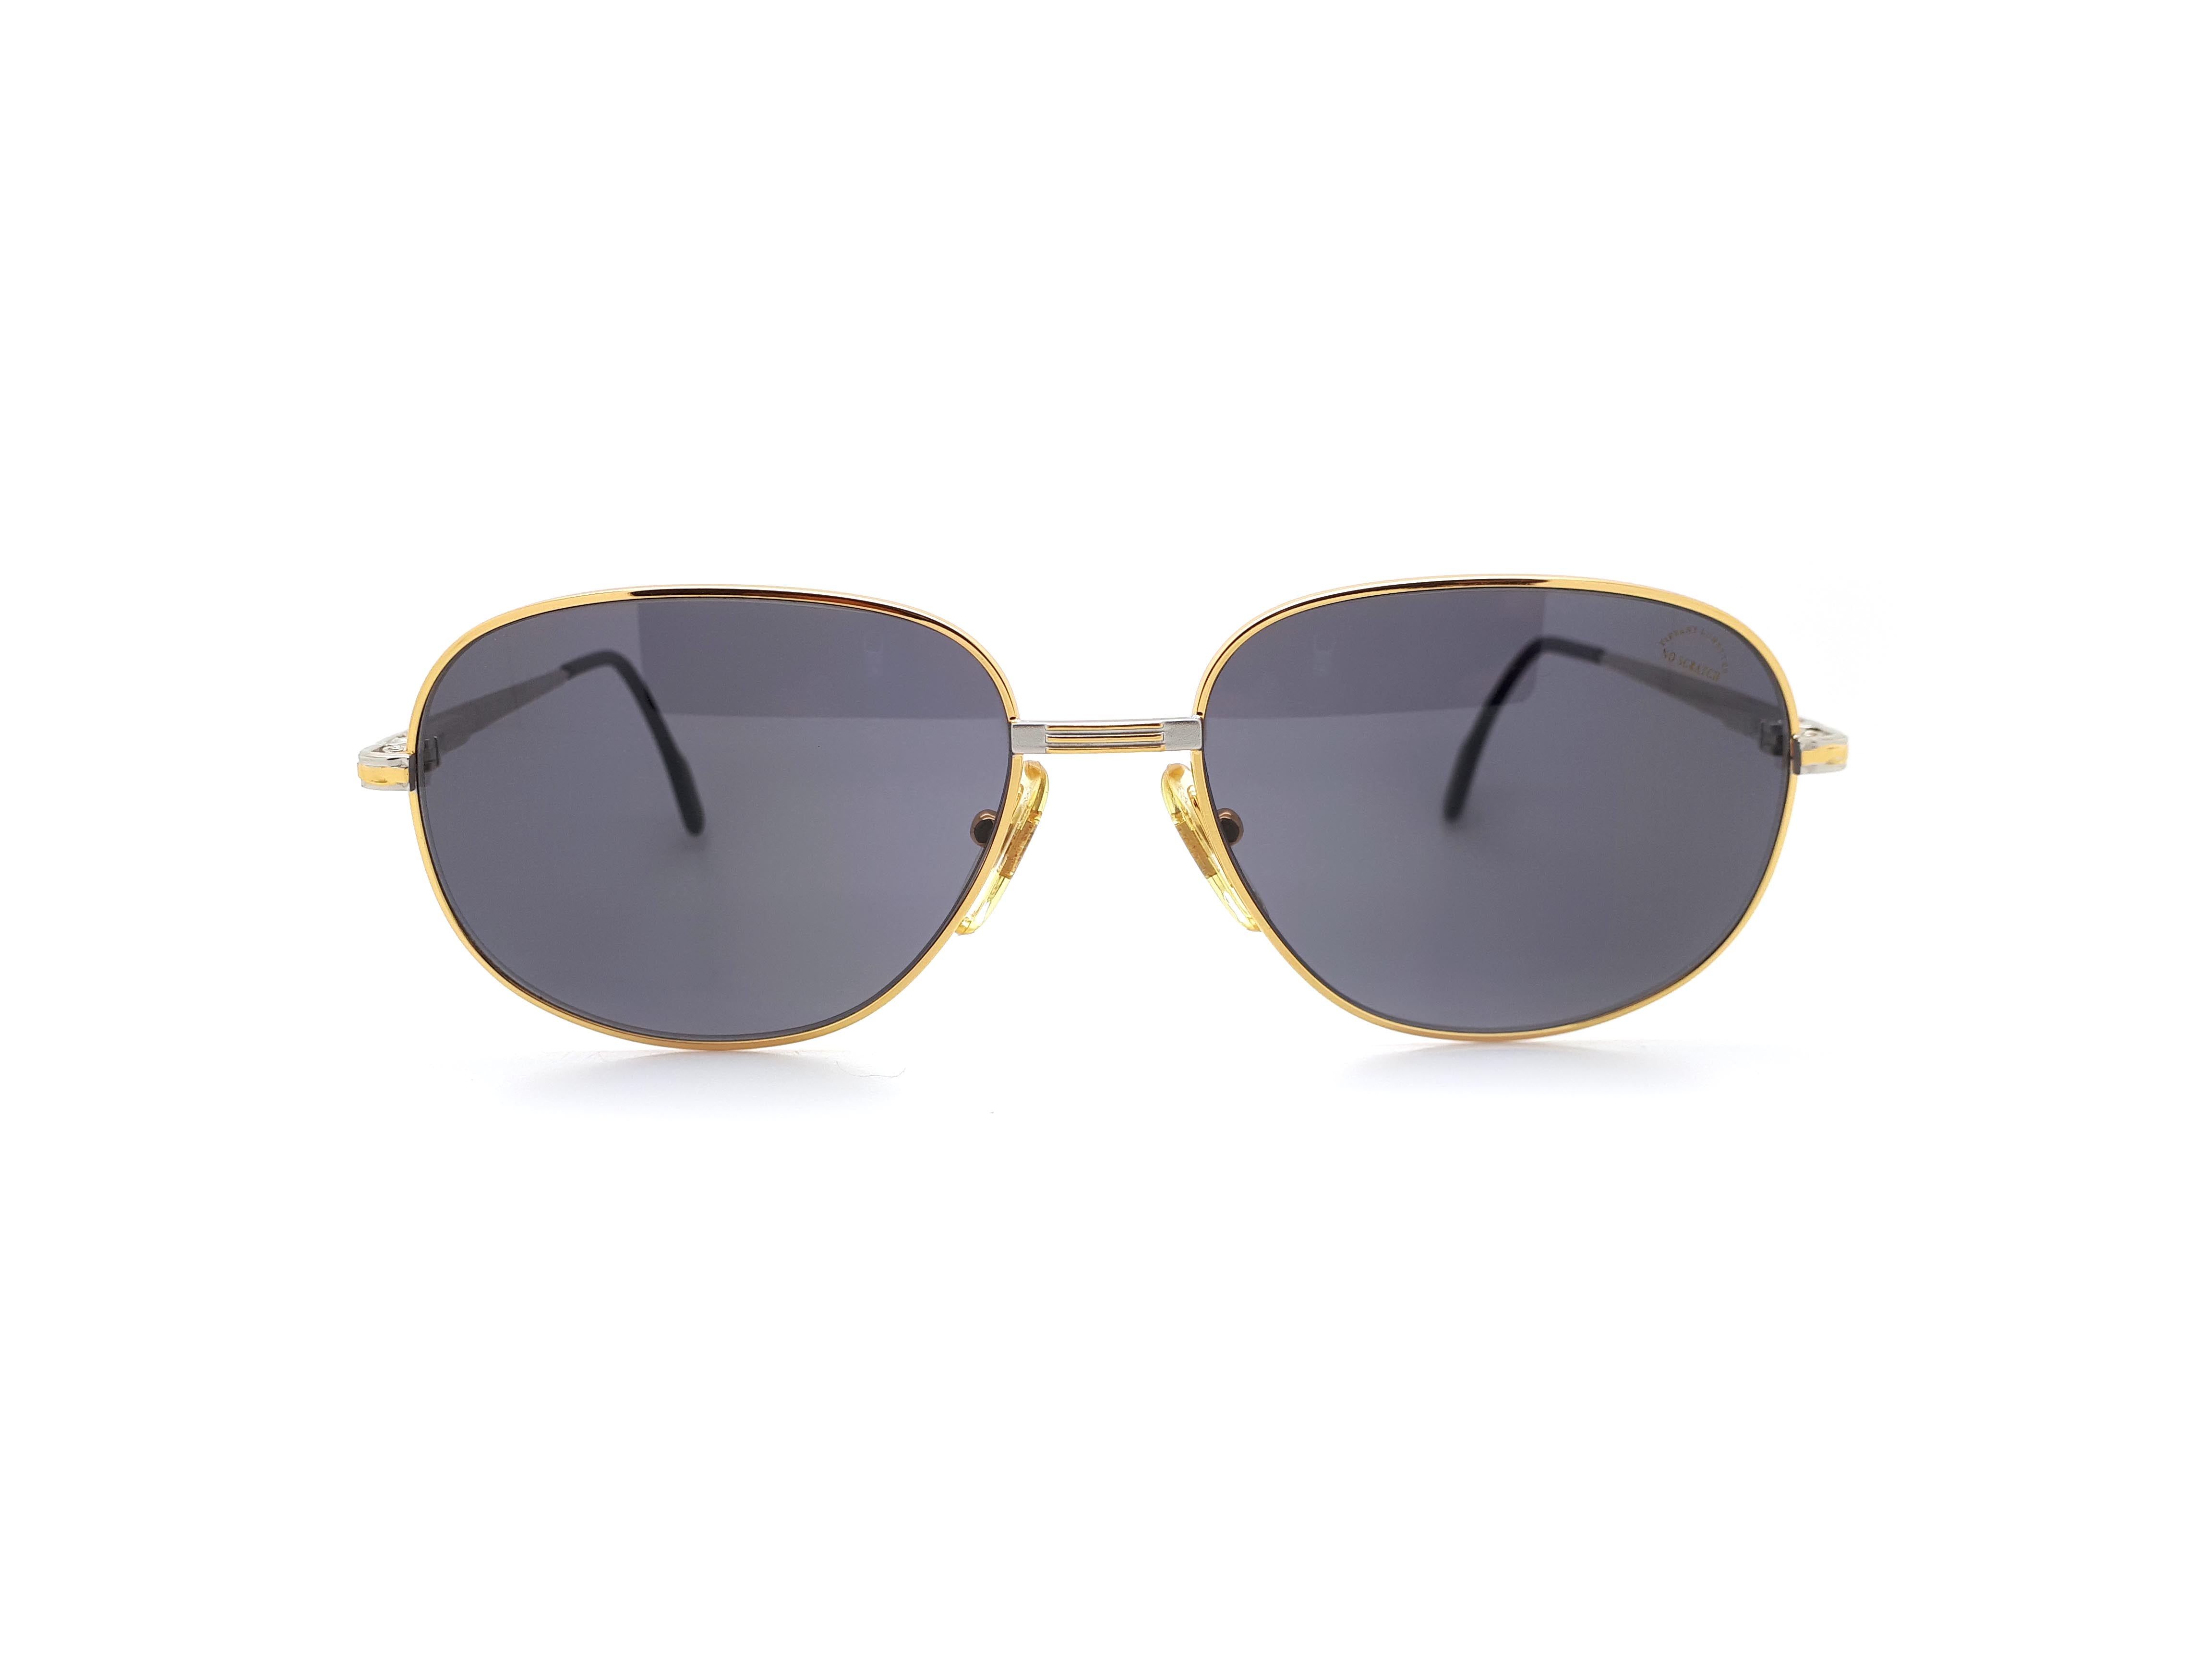 Life by Tiffany Lunettes T371 C1 23KT Gold Plated Vintage Square 90s  Sunglasses – Ed & Sarna Vintage Eyewear